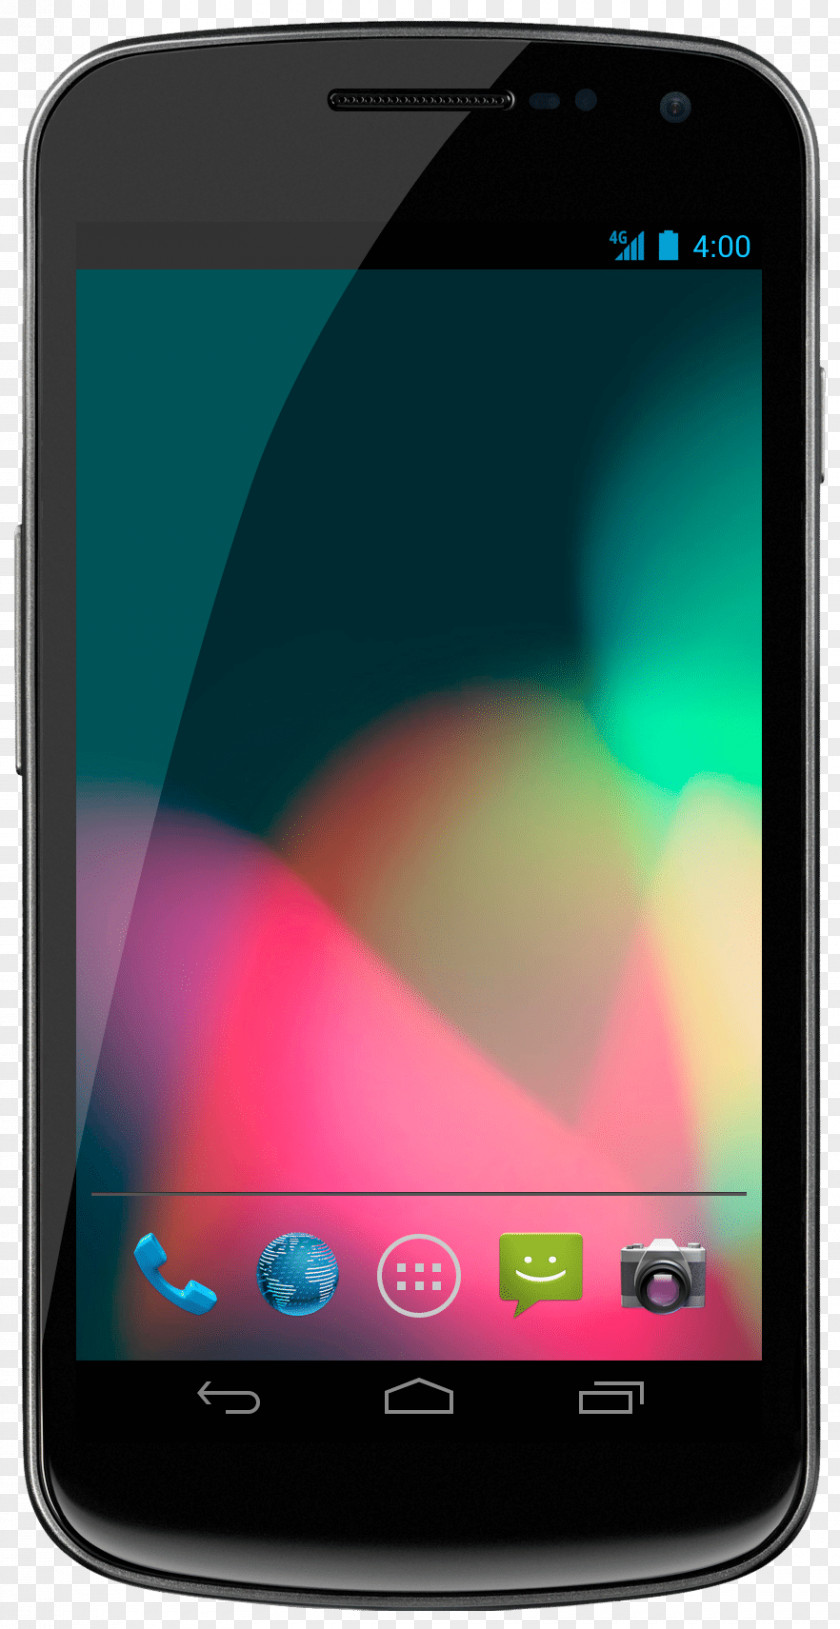 Galaxy Nexus 7 Android Google Smartphone Telephone PNG